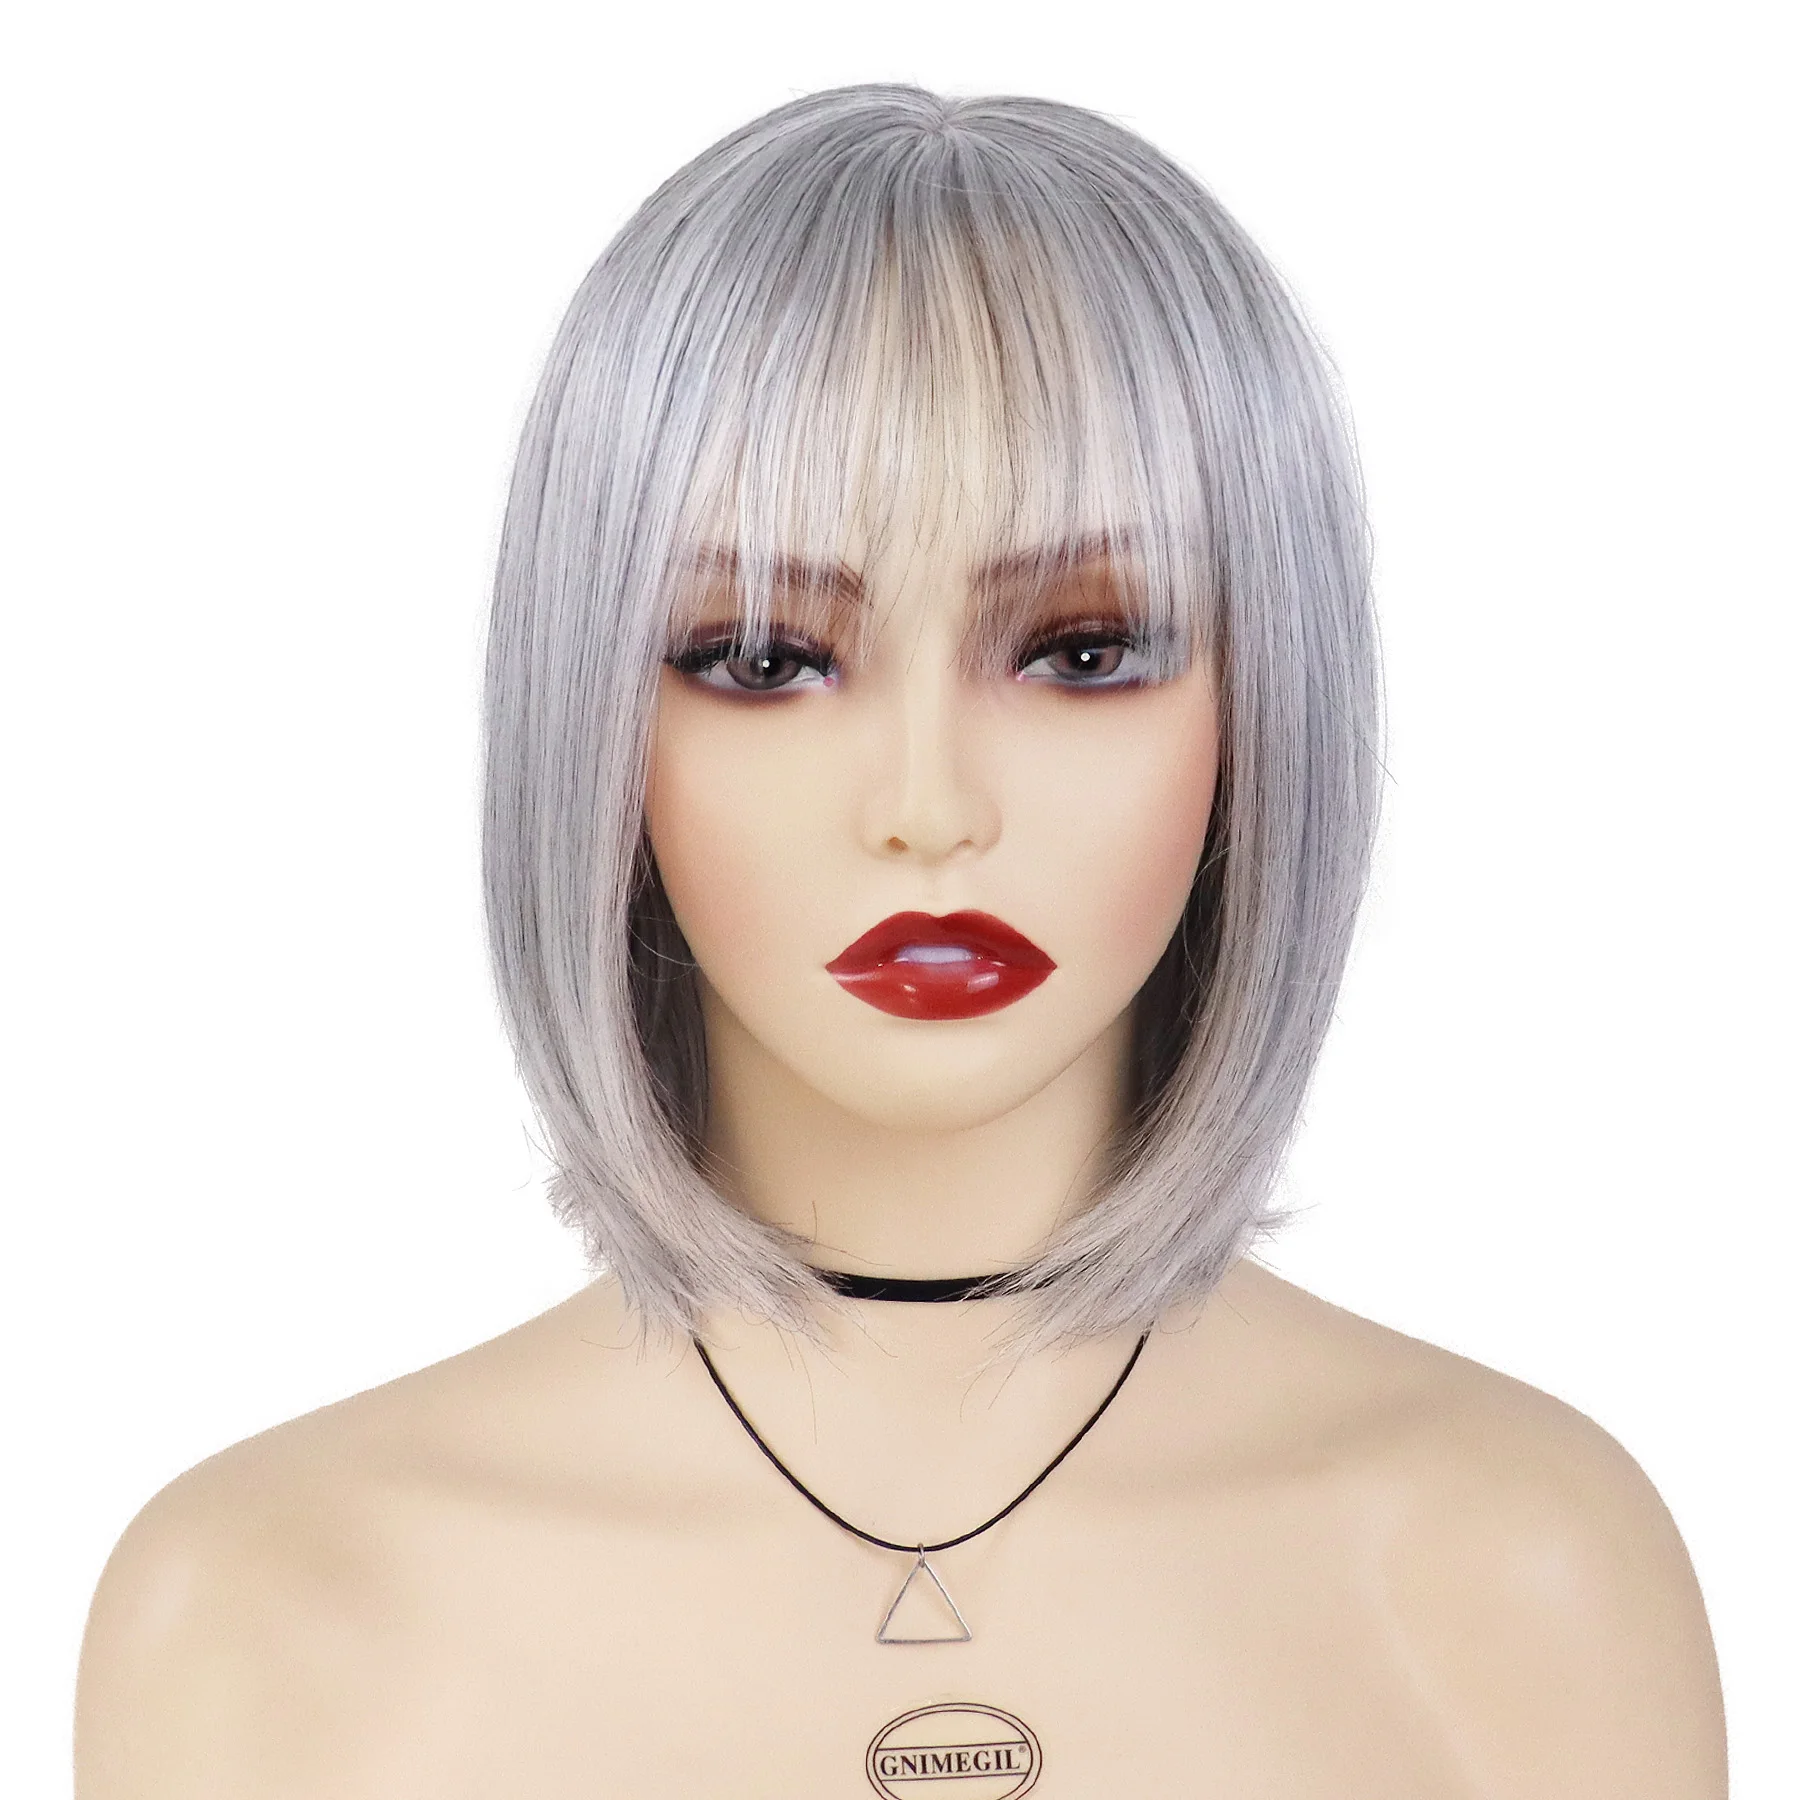 

GNIMEGIL Synthetic Wigs for Women Silver Grey Hair Cosplay Short Bob Wig with Bang Natural Old Lady Wig Costume Straight Haircut